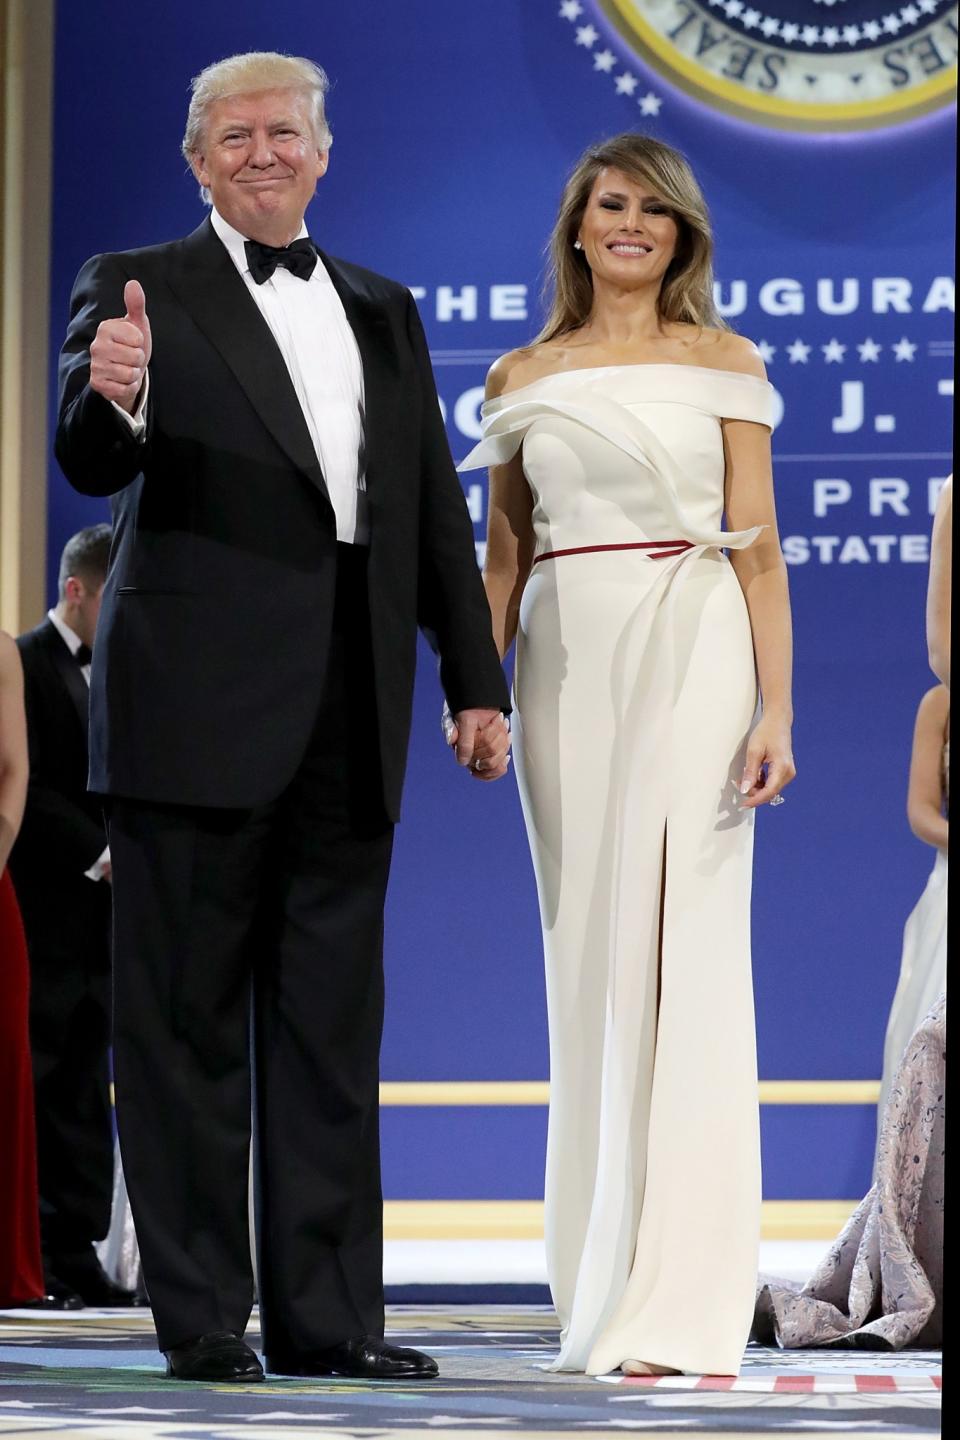 Melania was a co-designer of this ivory off-the-shoulder gown. She enlisted the help of former Carolina Herrera creative director, Herve Pierre, to produce the simple design. [Photo: Getty]